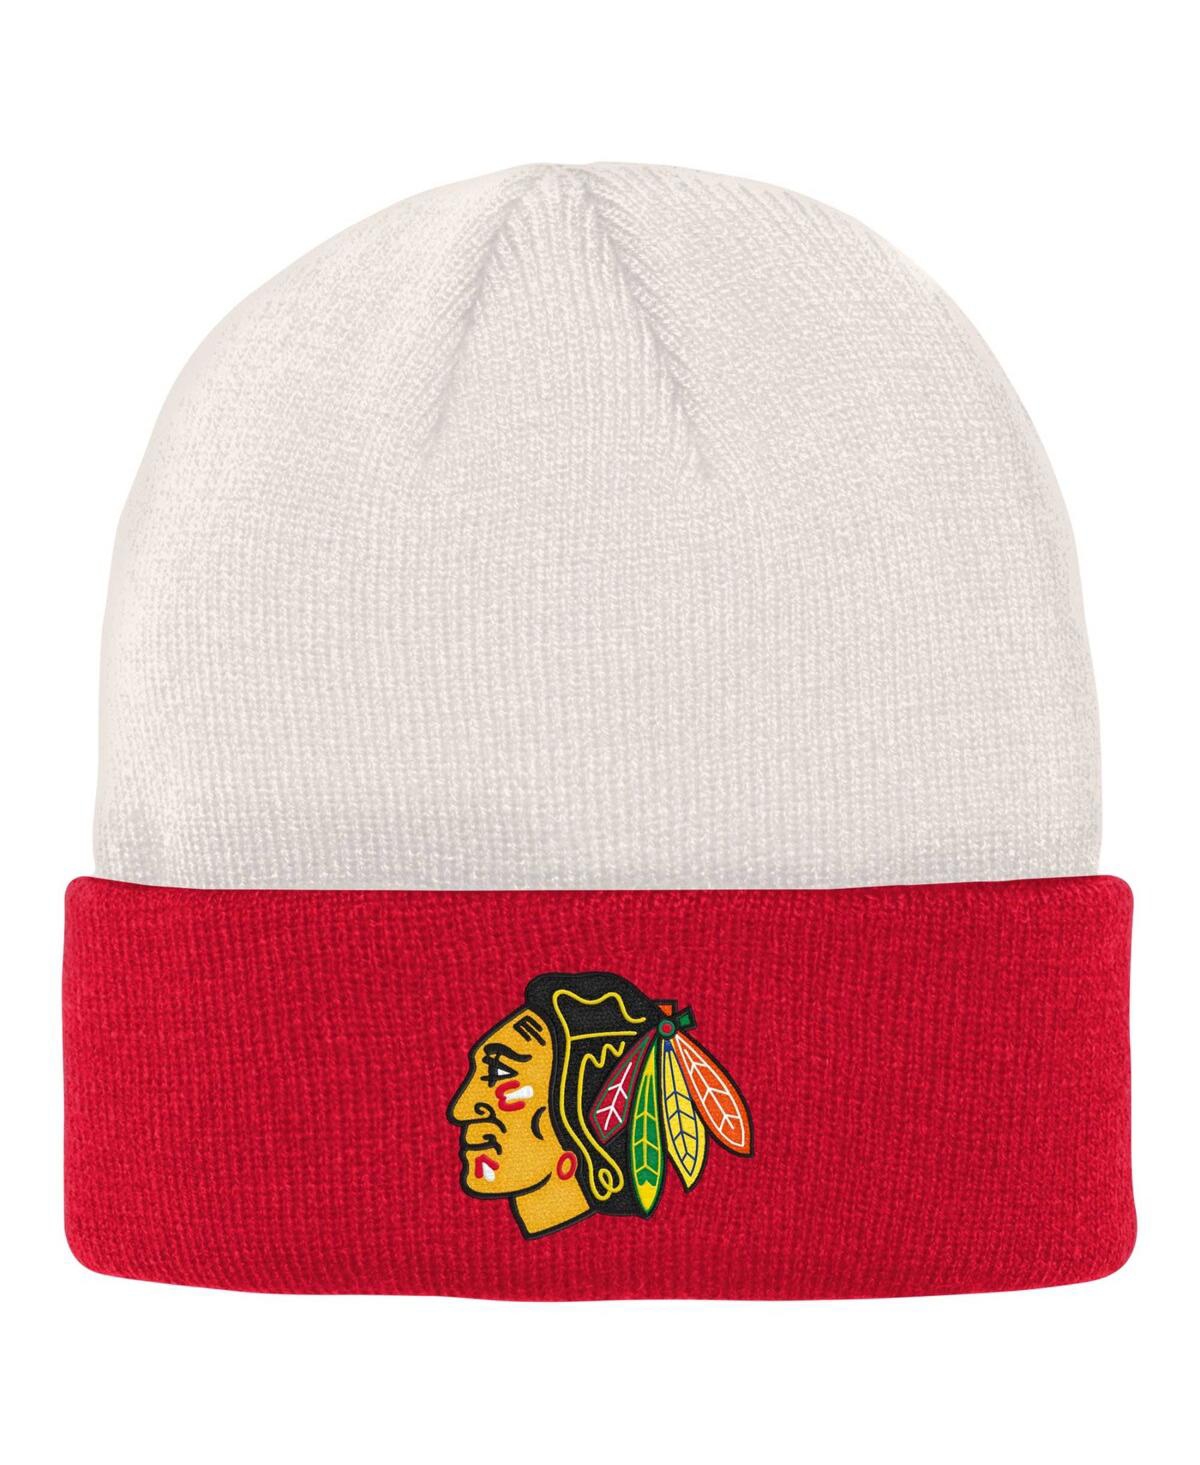 Outerstuff Kids' Big Boys And Girls Cream, Red Chicago Blackhawks Logo Cuffed Knit Hat In Cream,red